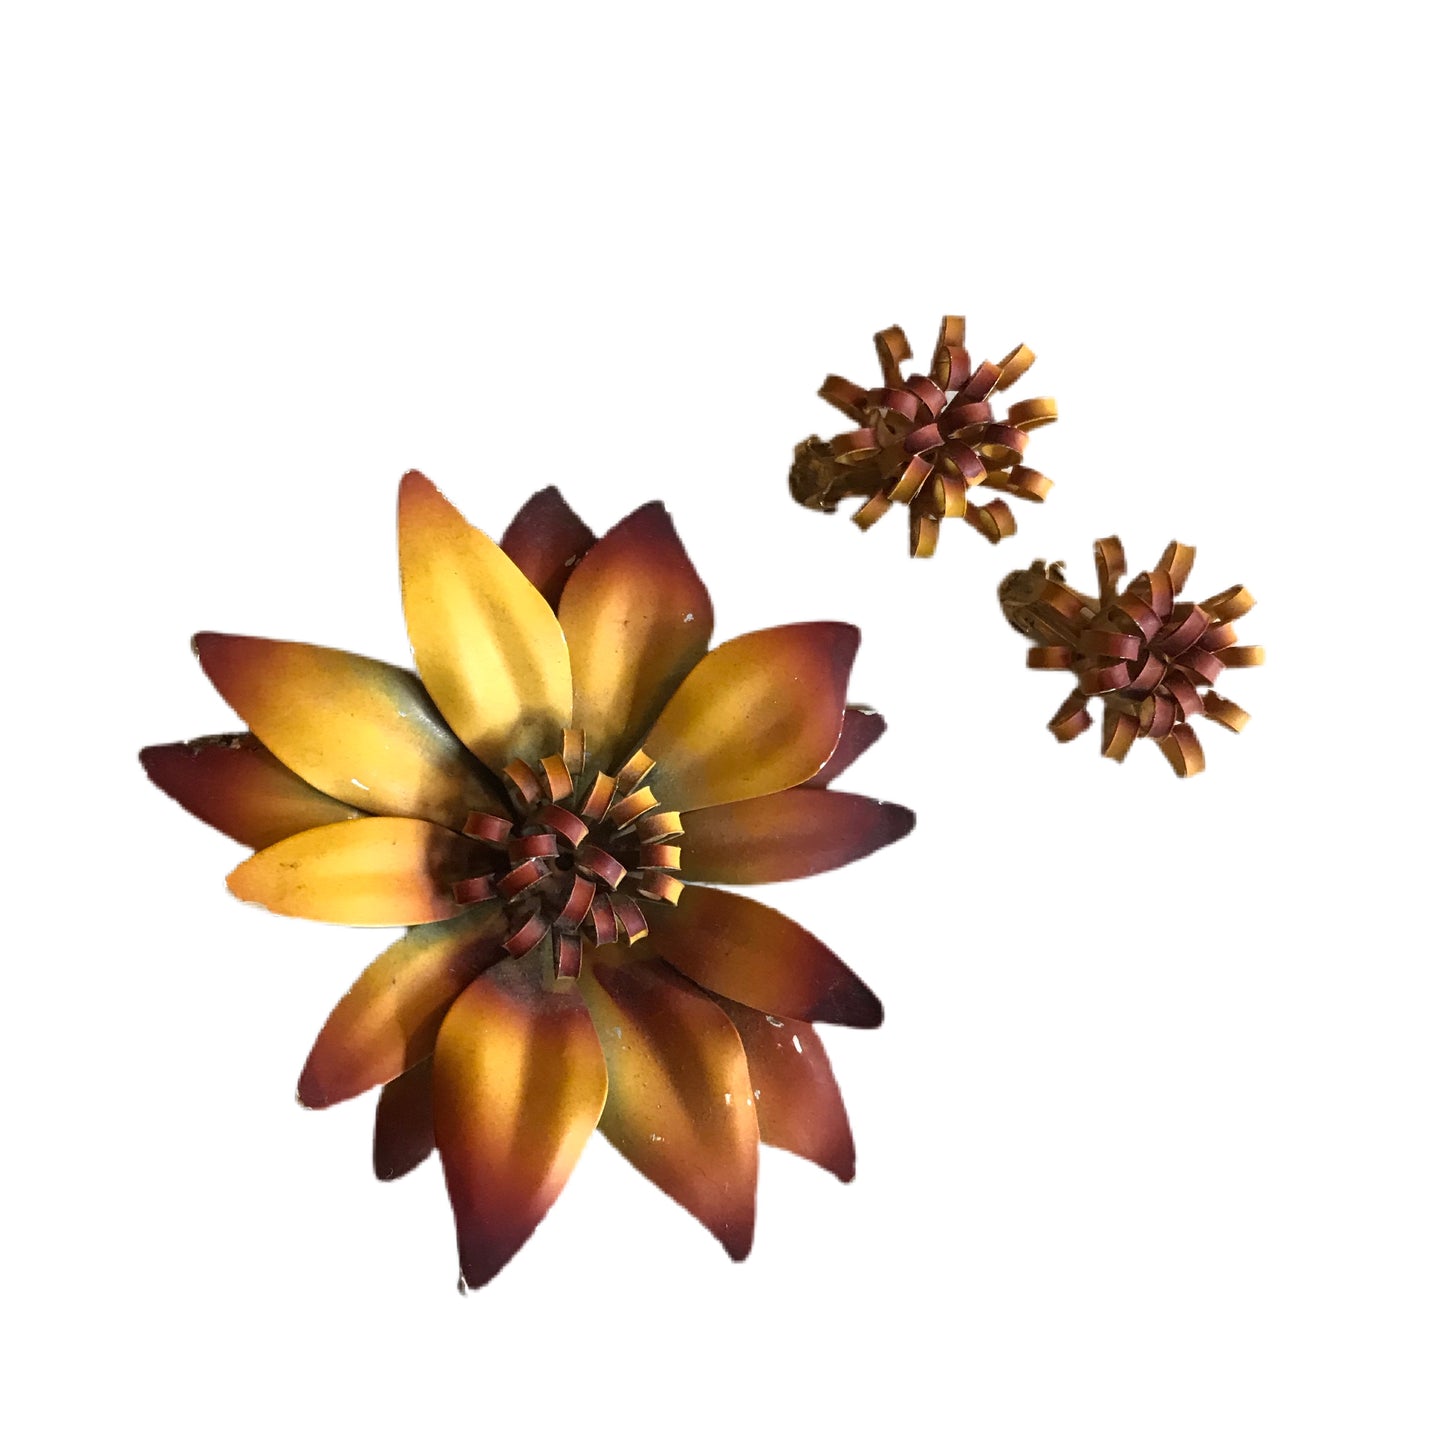 Sunset Ombre Hued Metal Daisy Flower Brooch & Clip Earrings circa 1960s